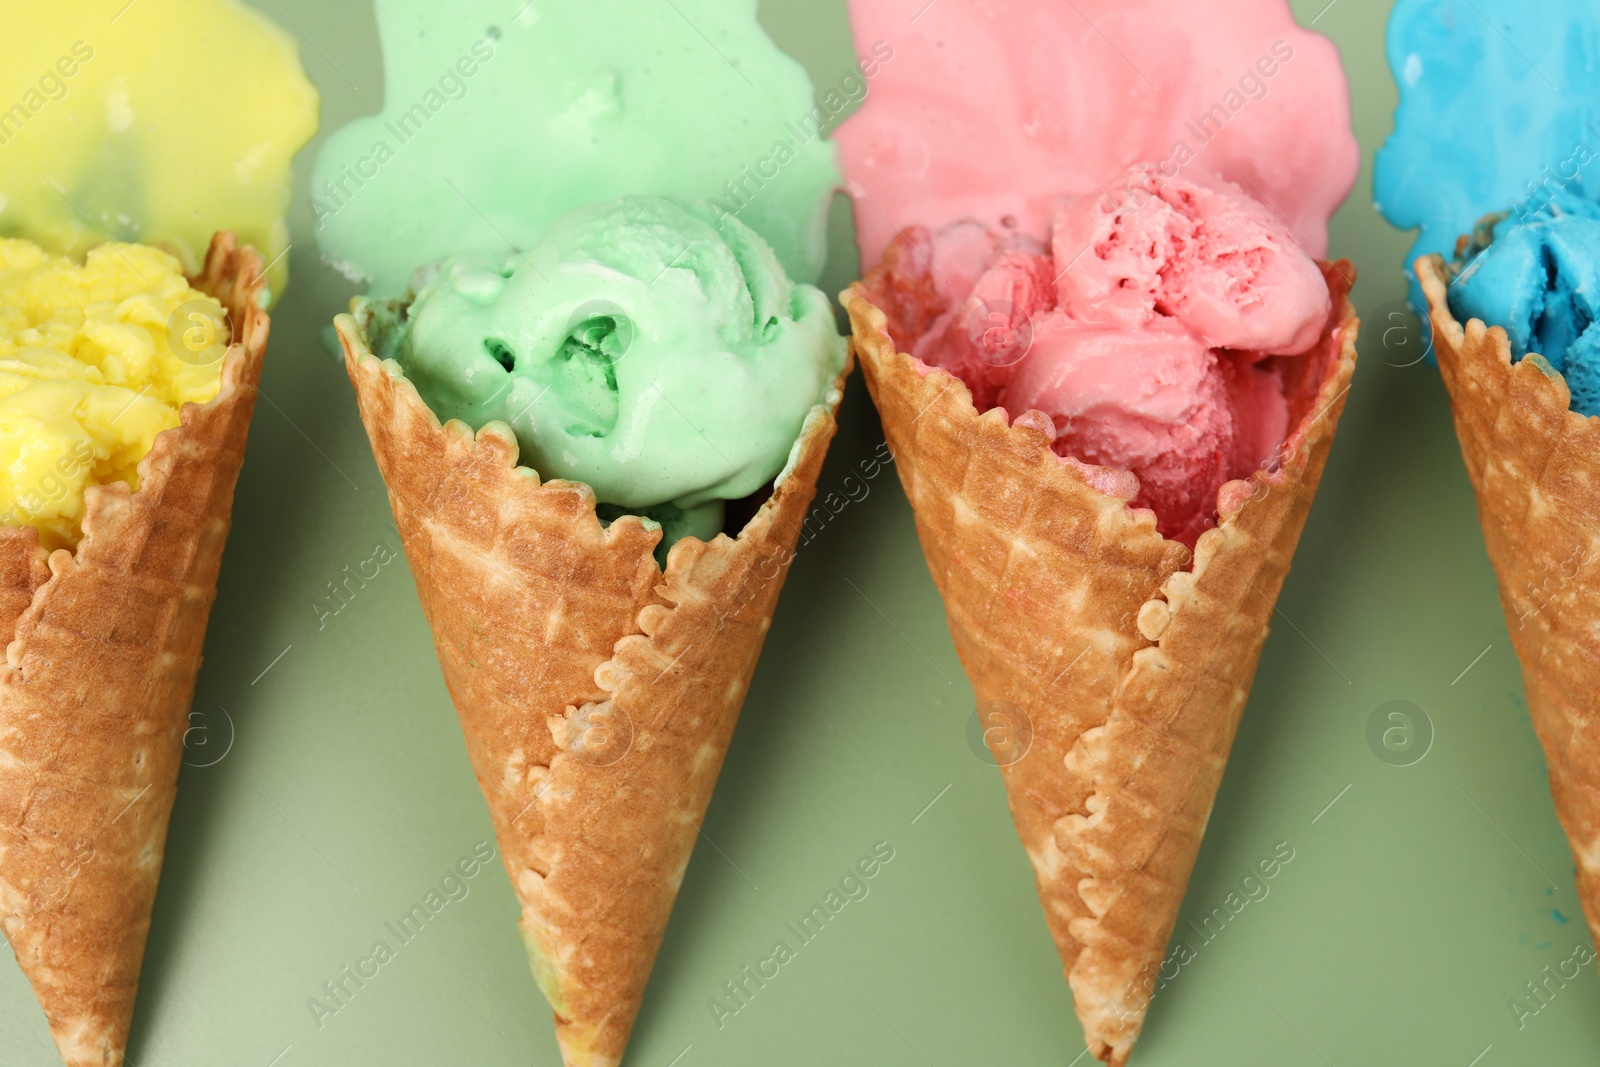 Photo of Melted ice cream in wafer cones on pale green background, flat lay